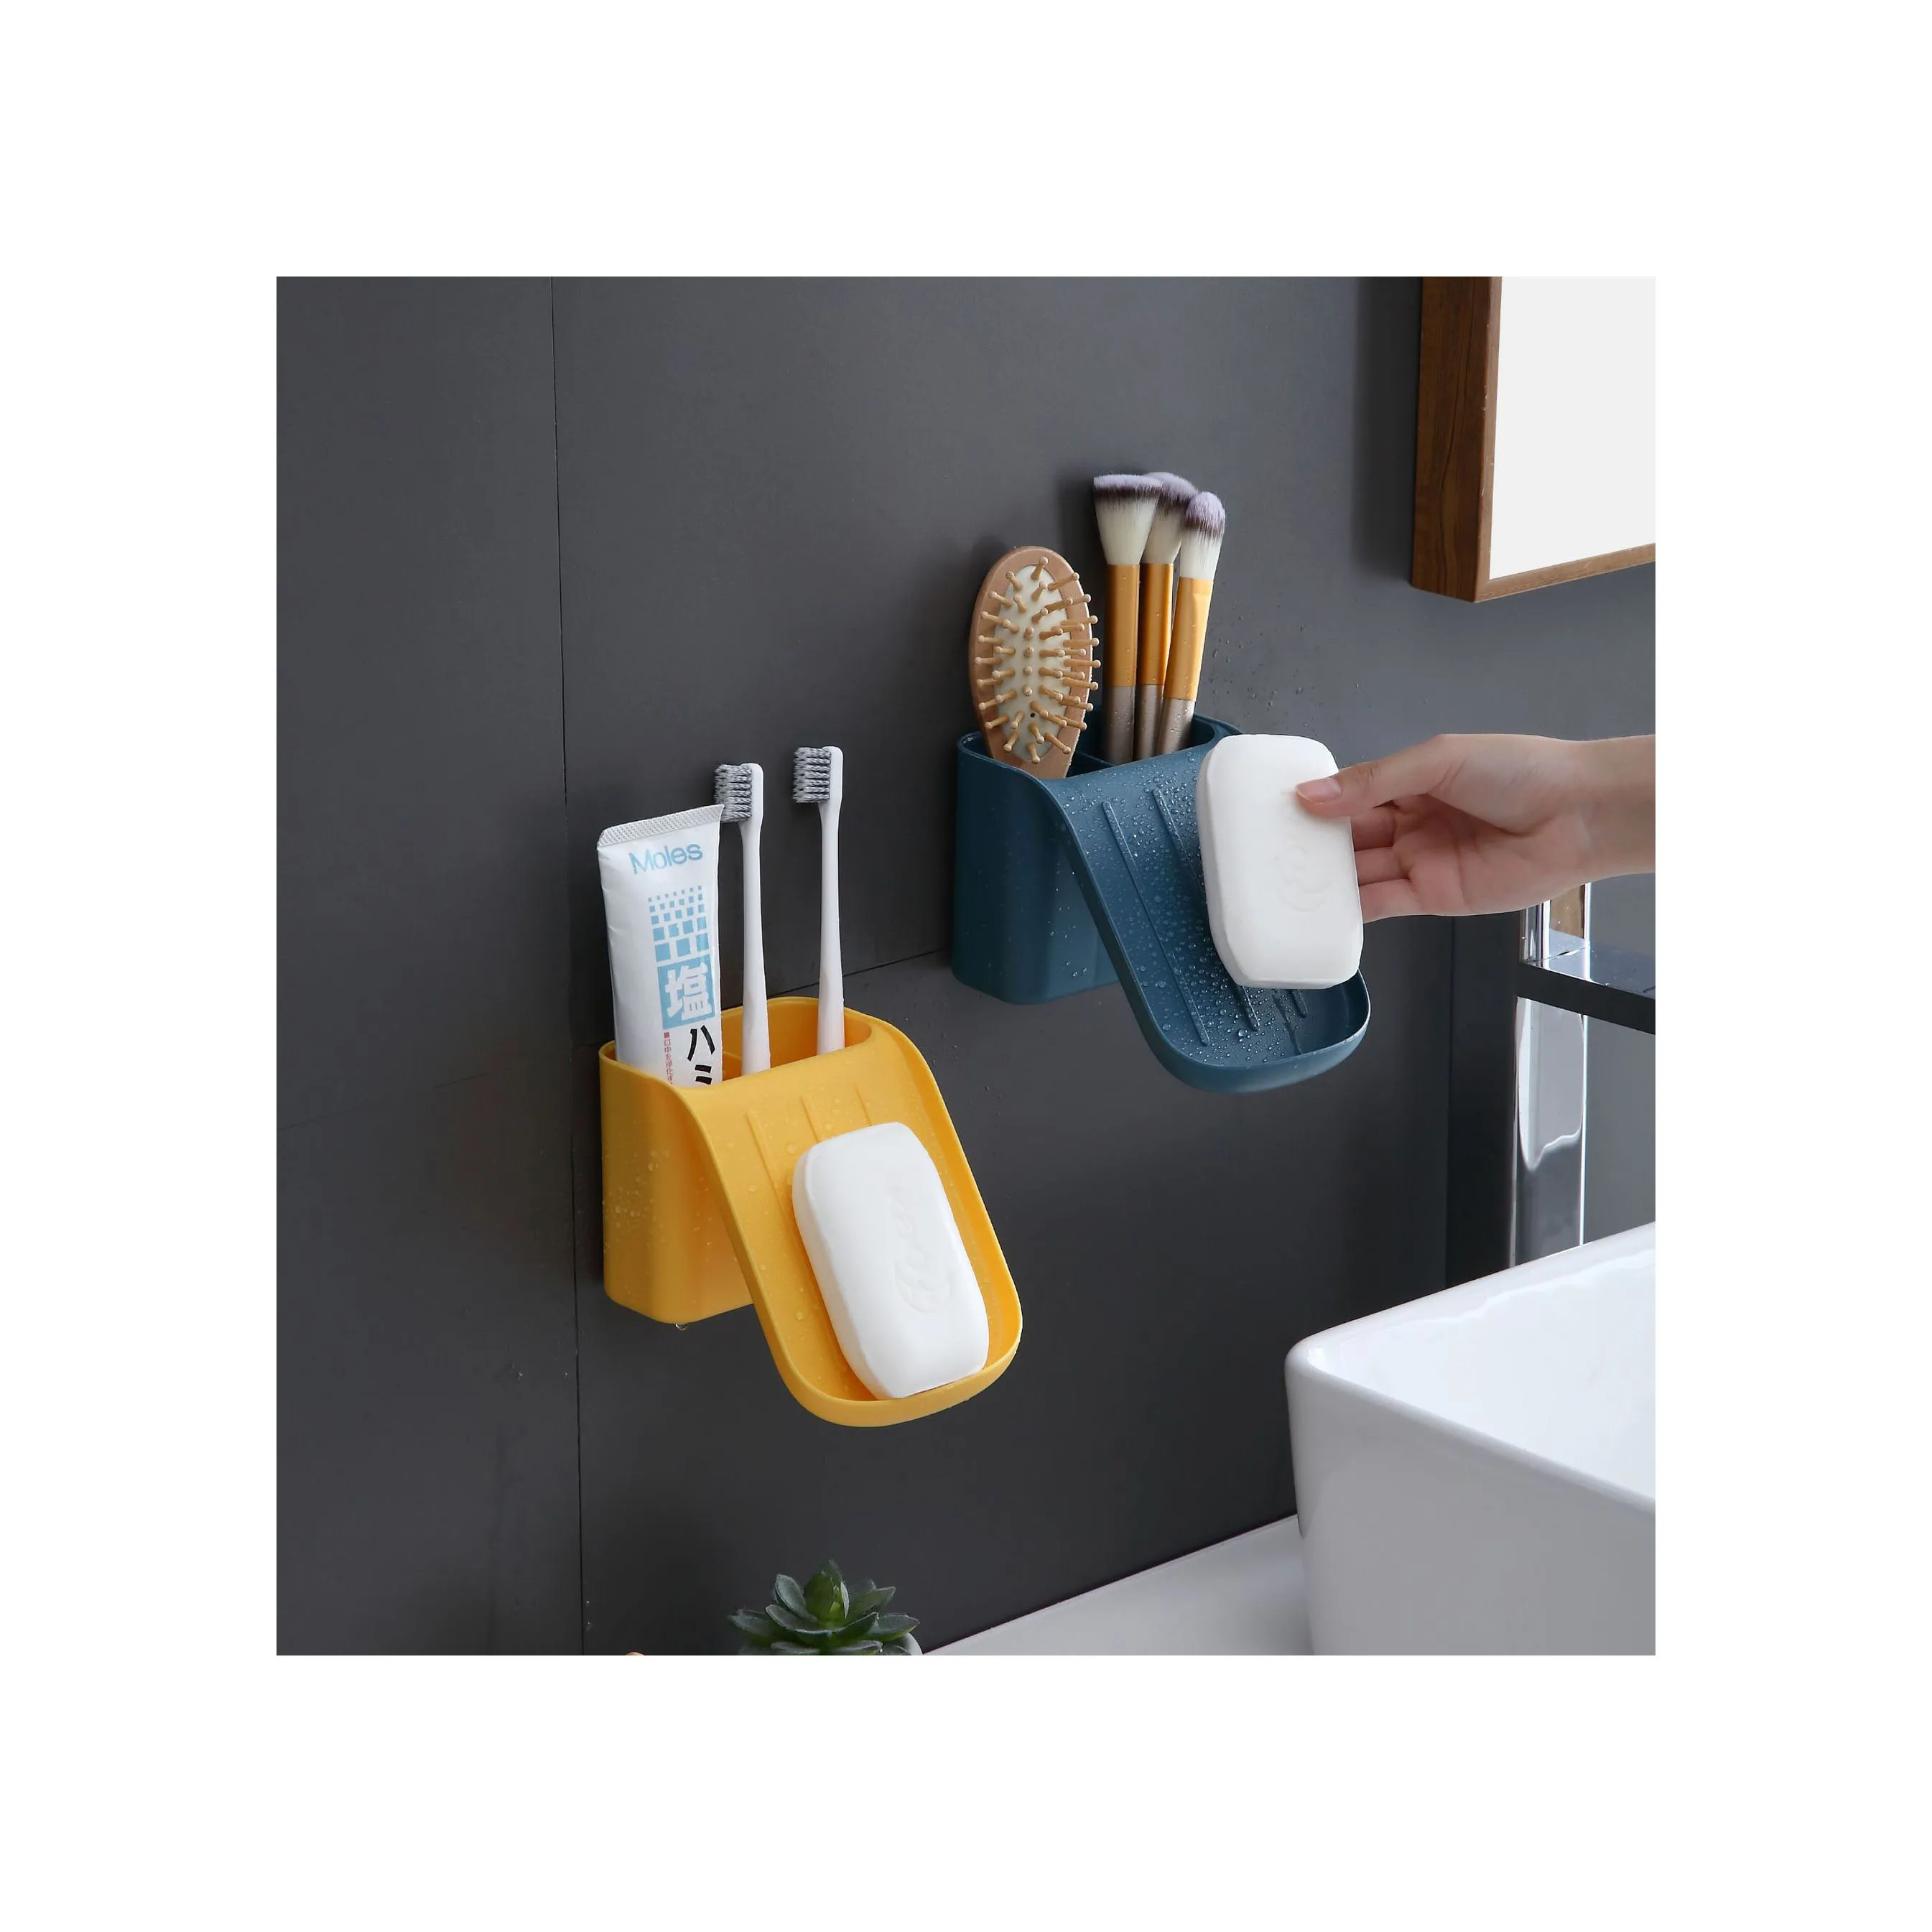 2023 New hot sell Non-trace paste wall hanging Bathroom vanities Adhesive Soap boxes storage holders Toothbrush holder